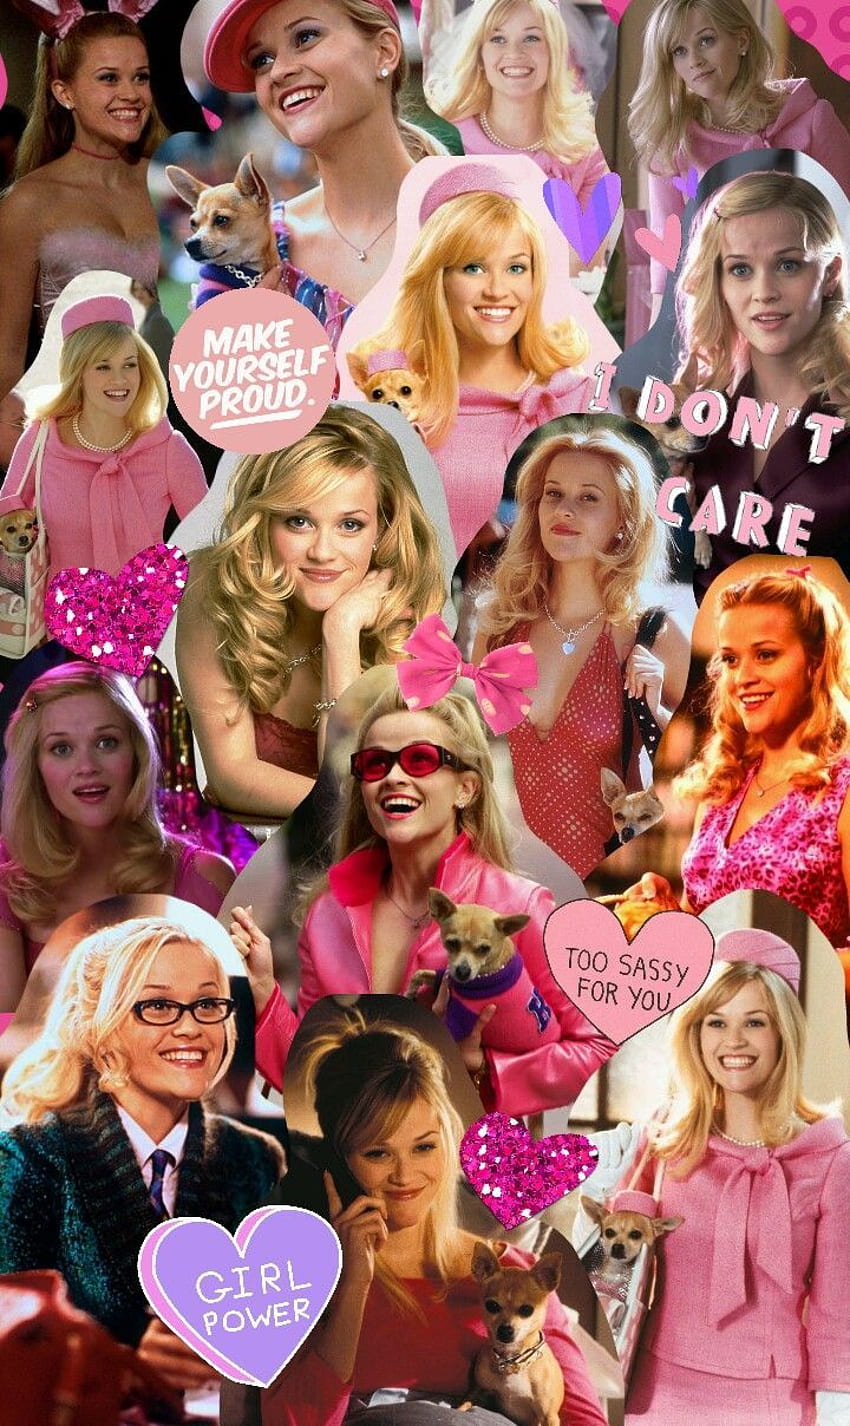 Legally Blonde Free 320x480 Wallpaper download  Download Free Legally  Blonde HD 320x480 Wallpapers to your mobile phone or tablet